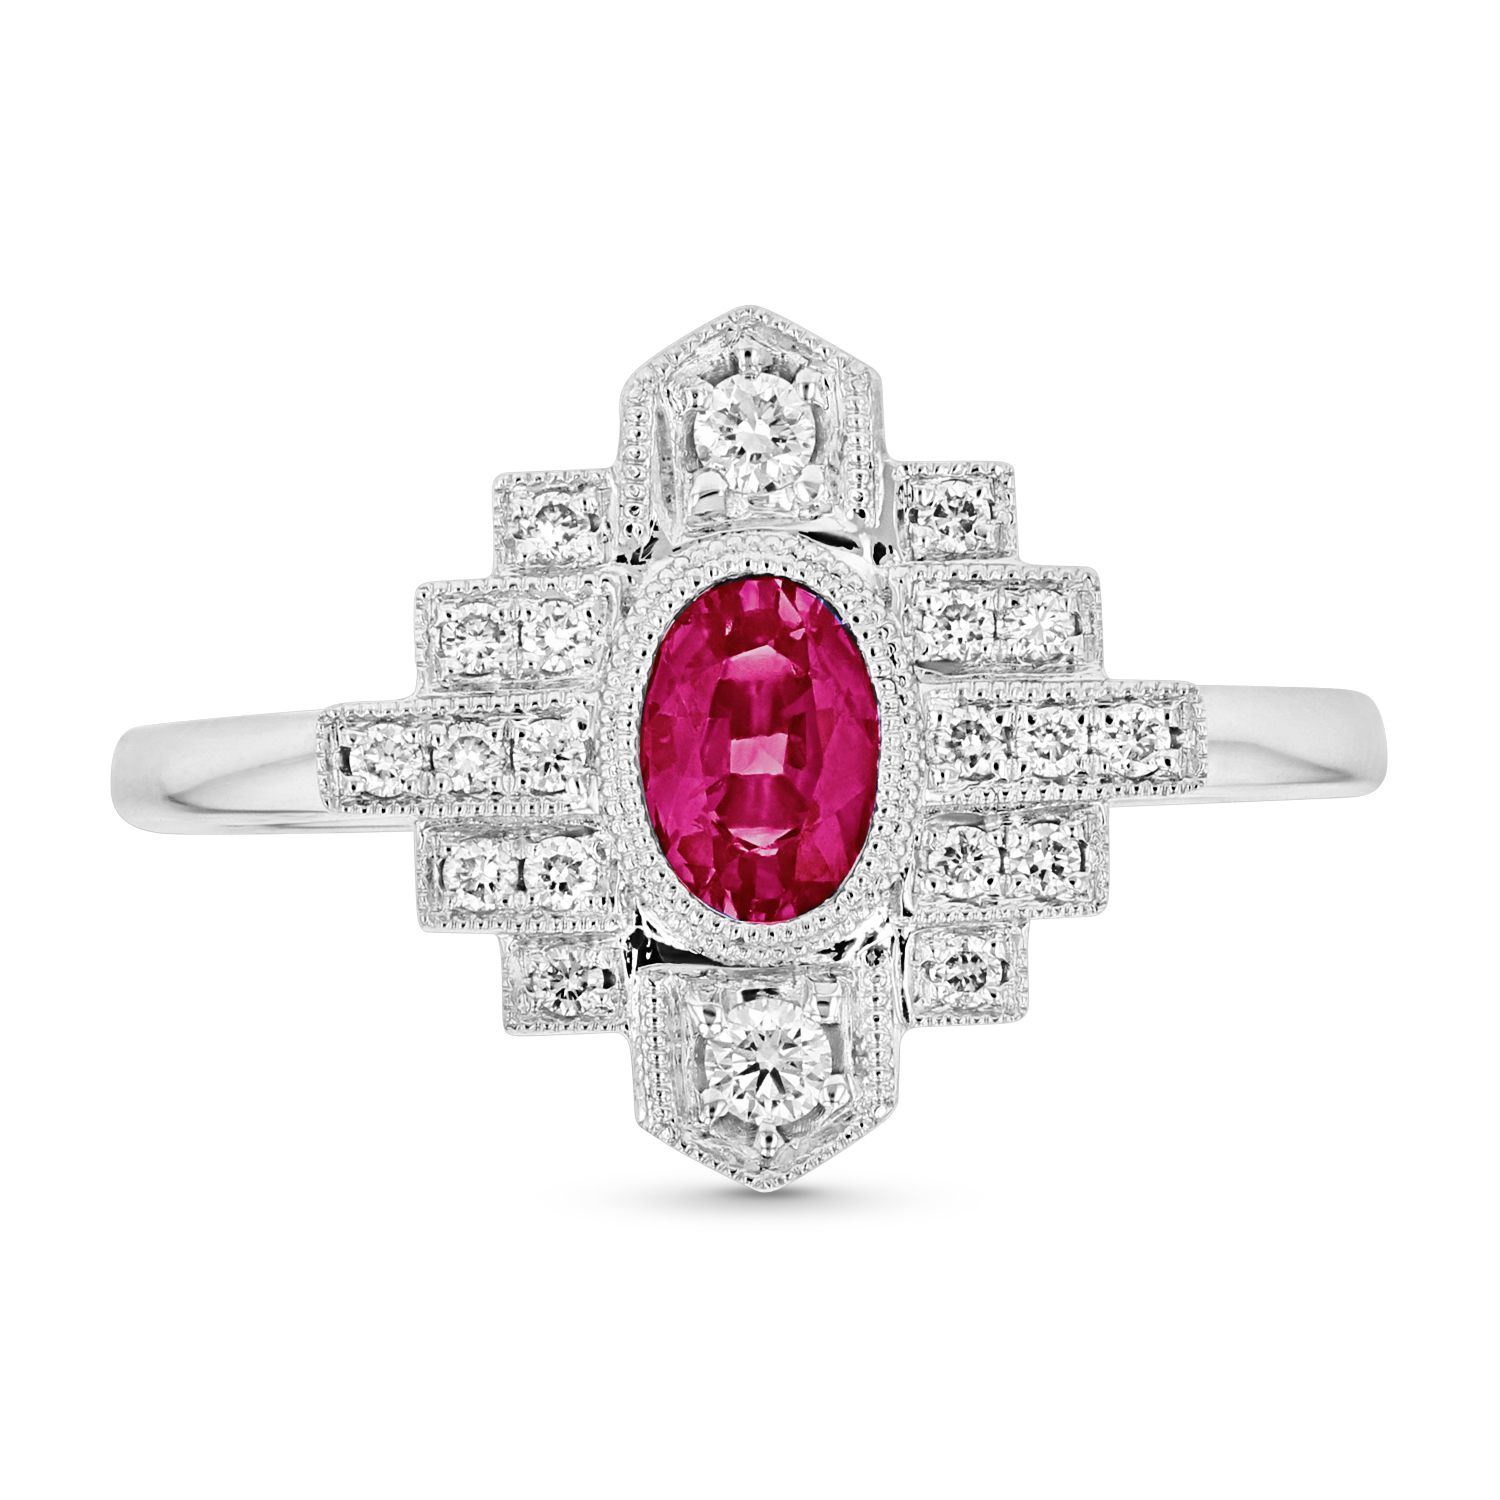 View 0.74ctw Ruby and Diamond Ring in 14k White Gold